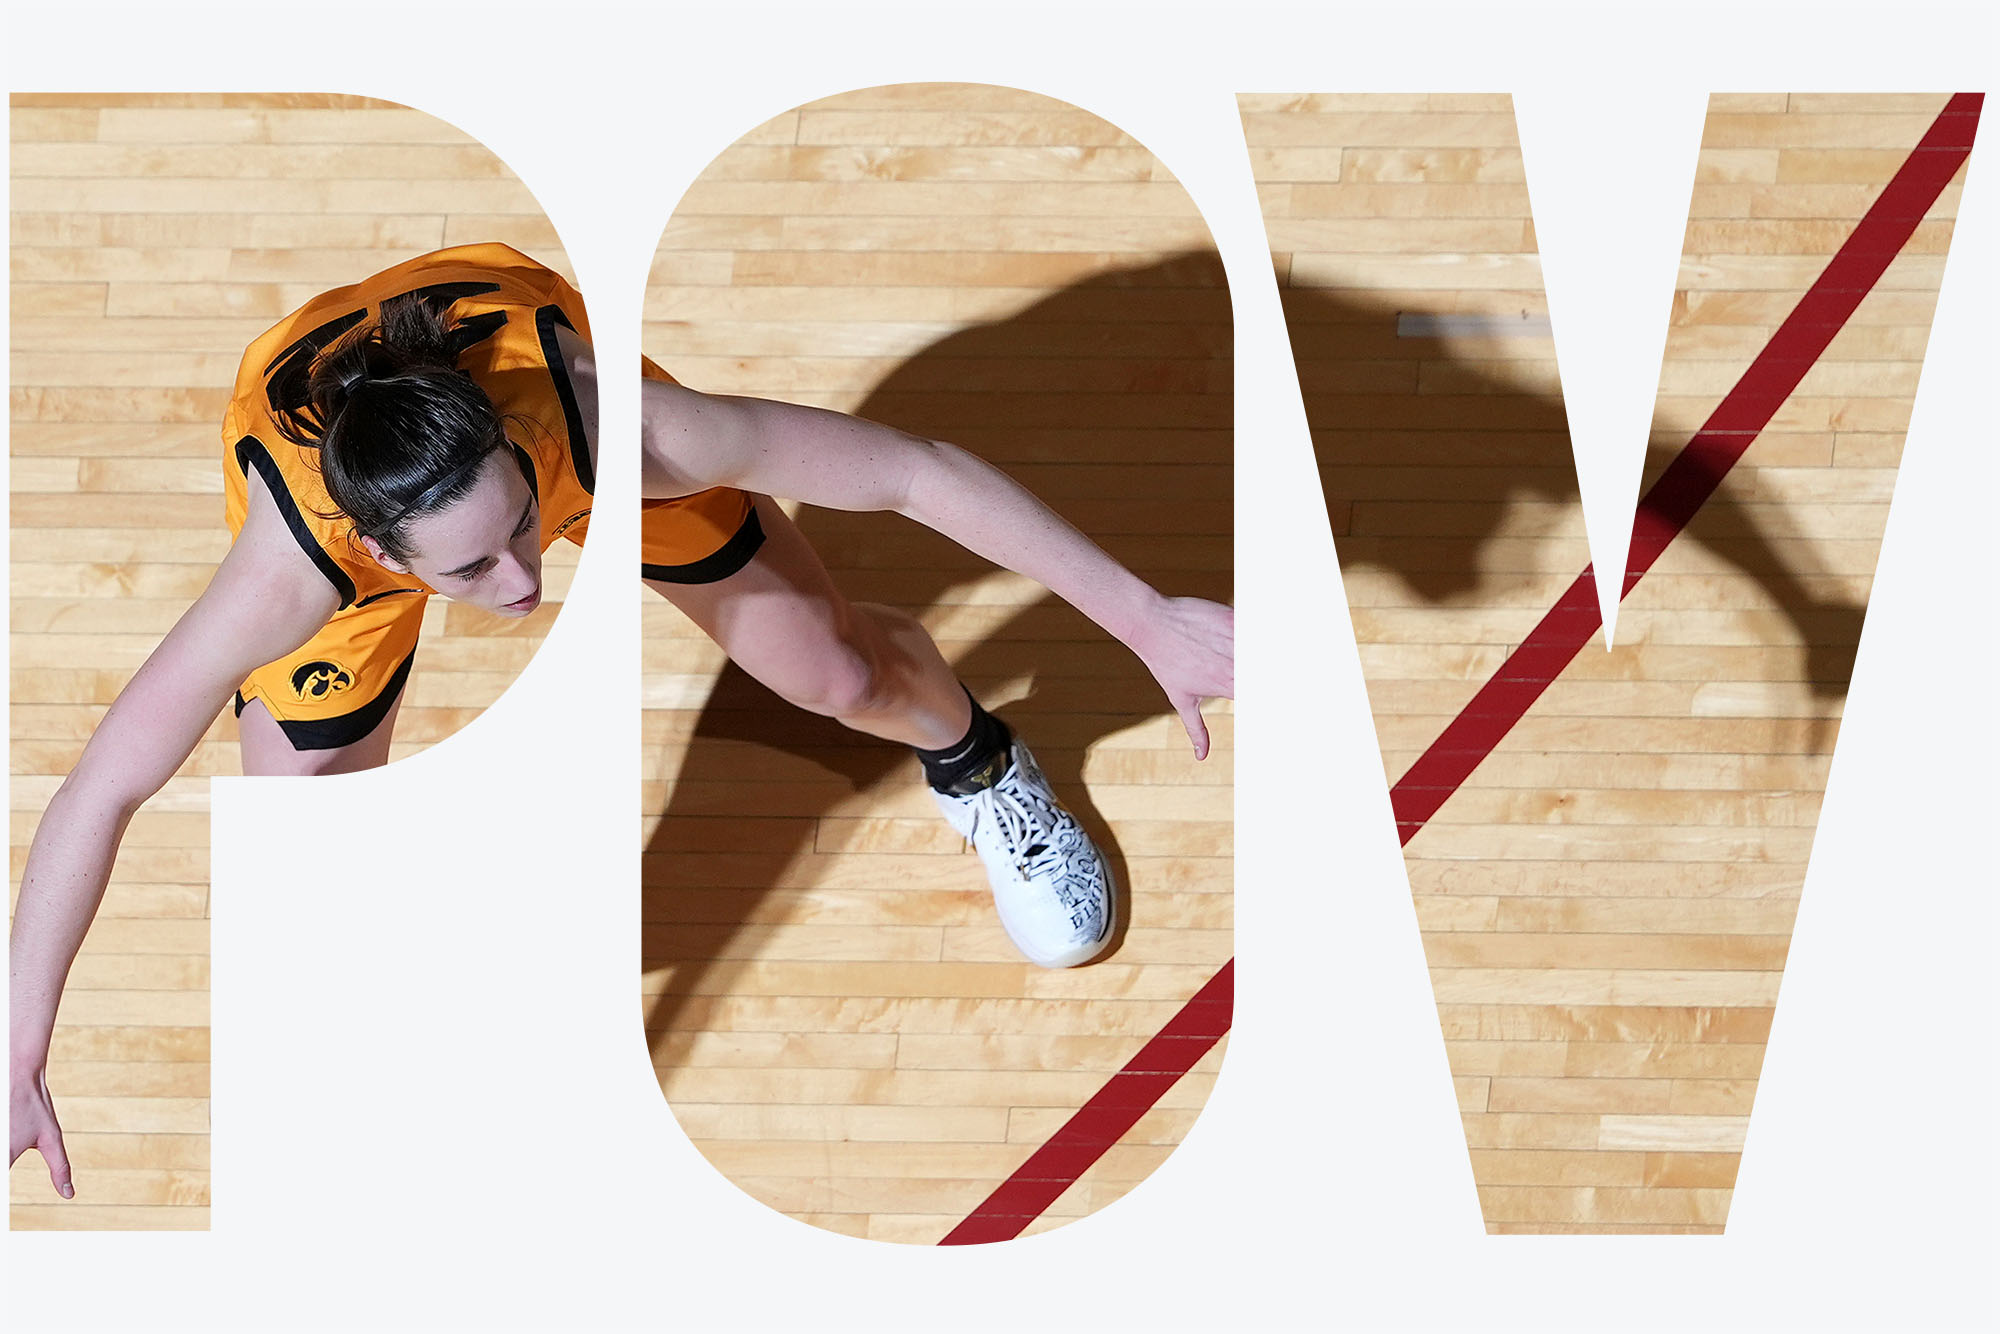 Photo: An aerial shot of a basketball player on the court. Image overlay has the letters "POV"